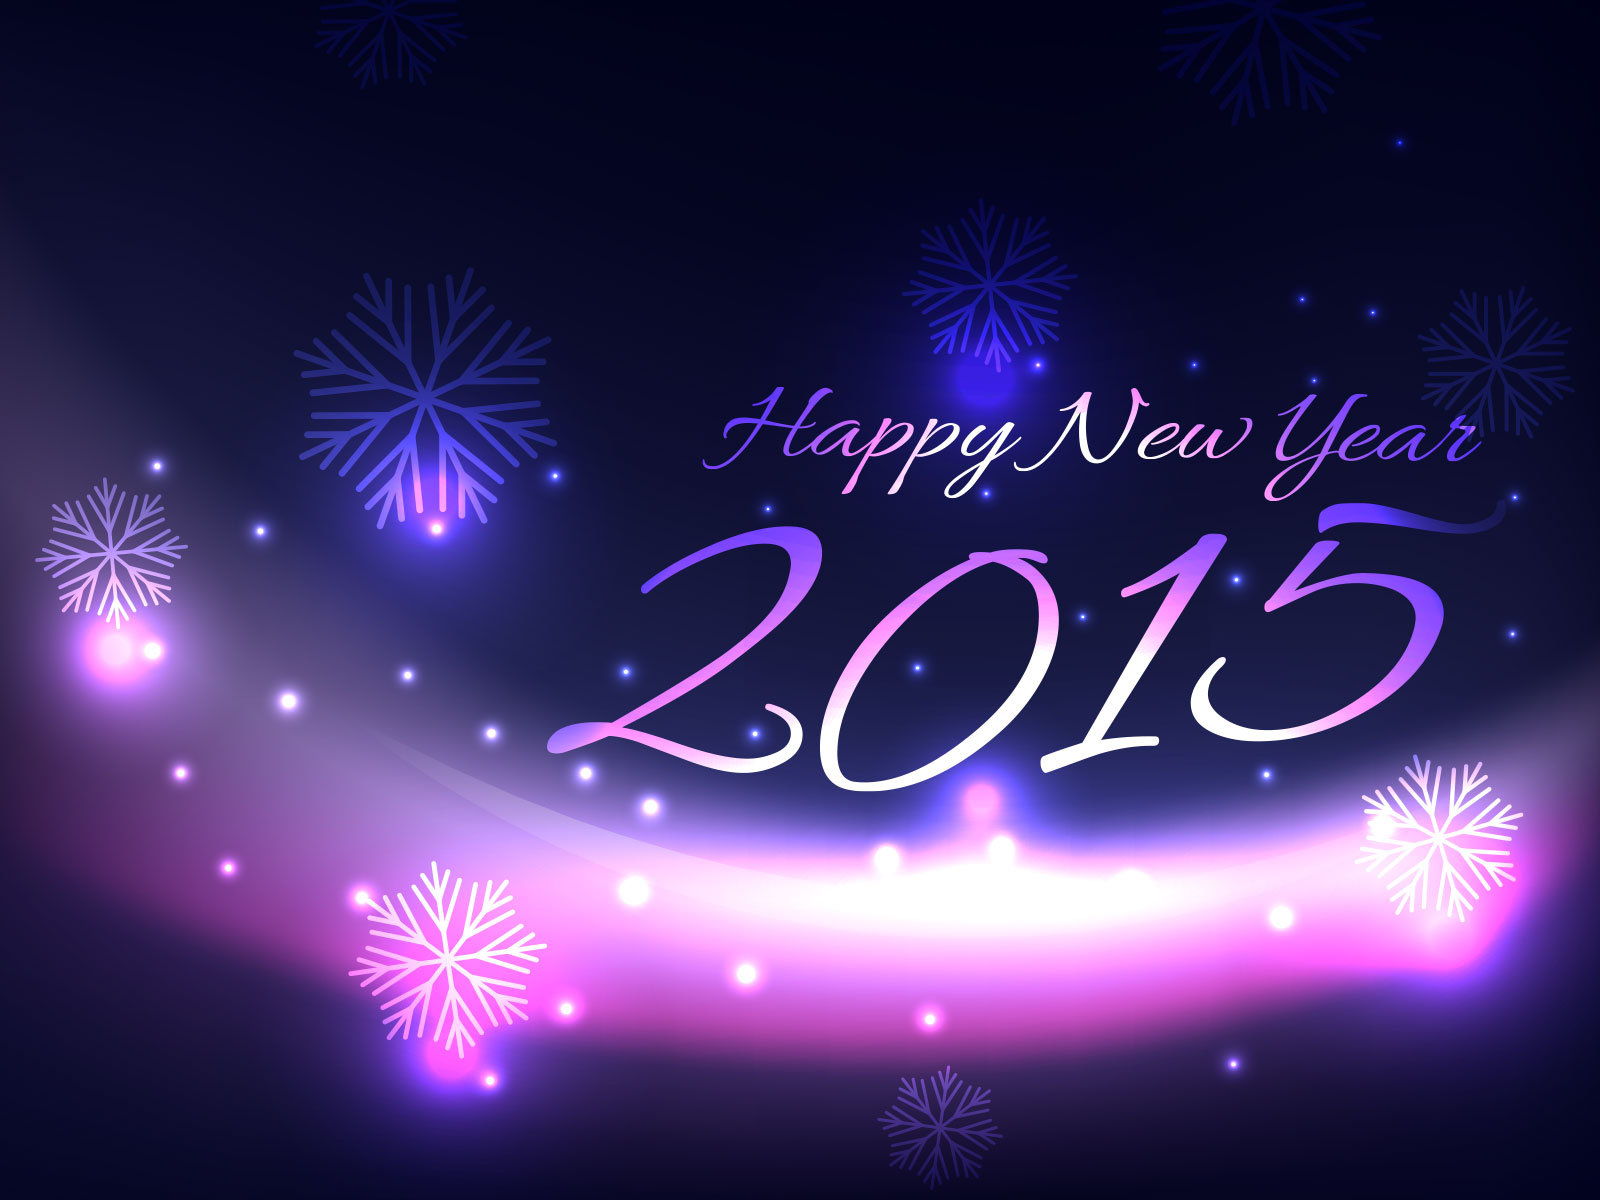 Untitled Happy New Year Wallpaper Image Cover